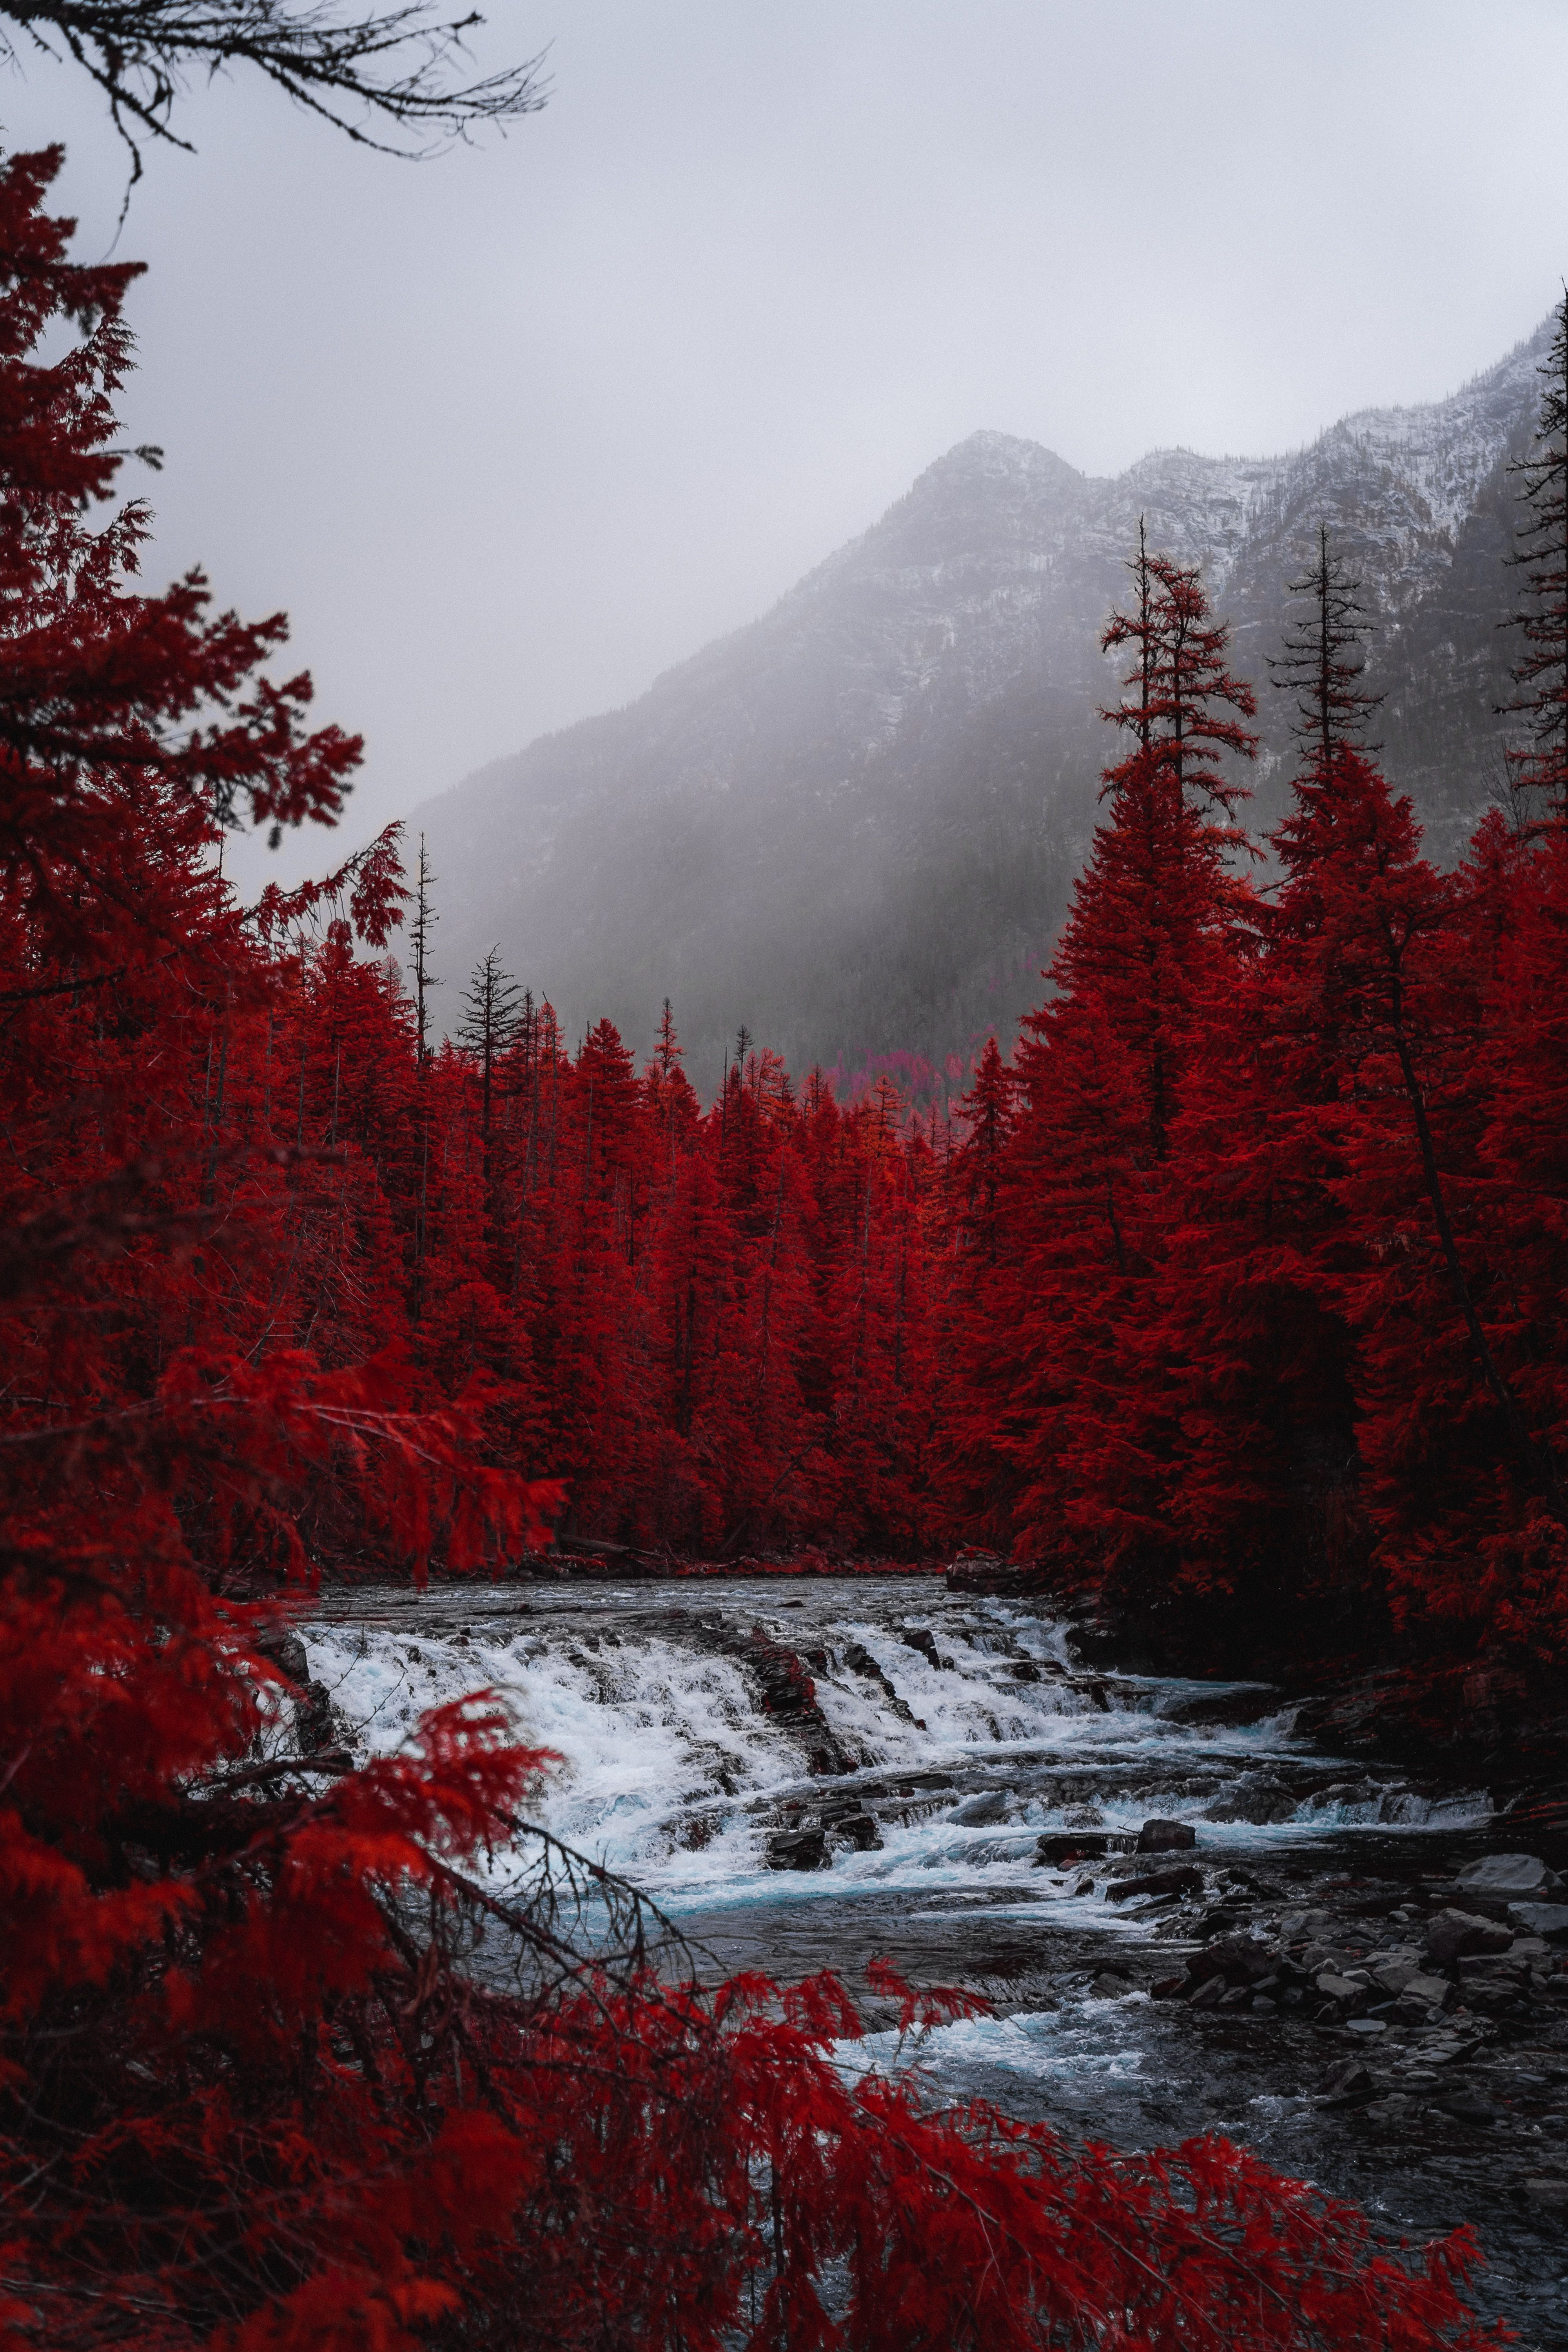 A river flows through a forest of red trees with a mountain in the background. - Scenery